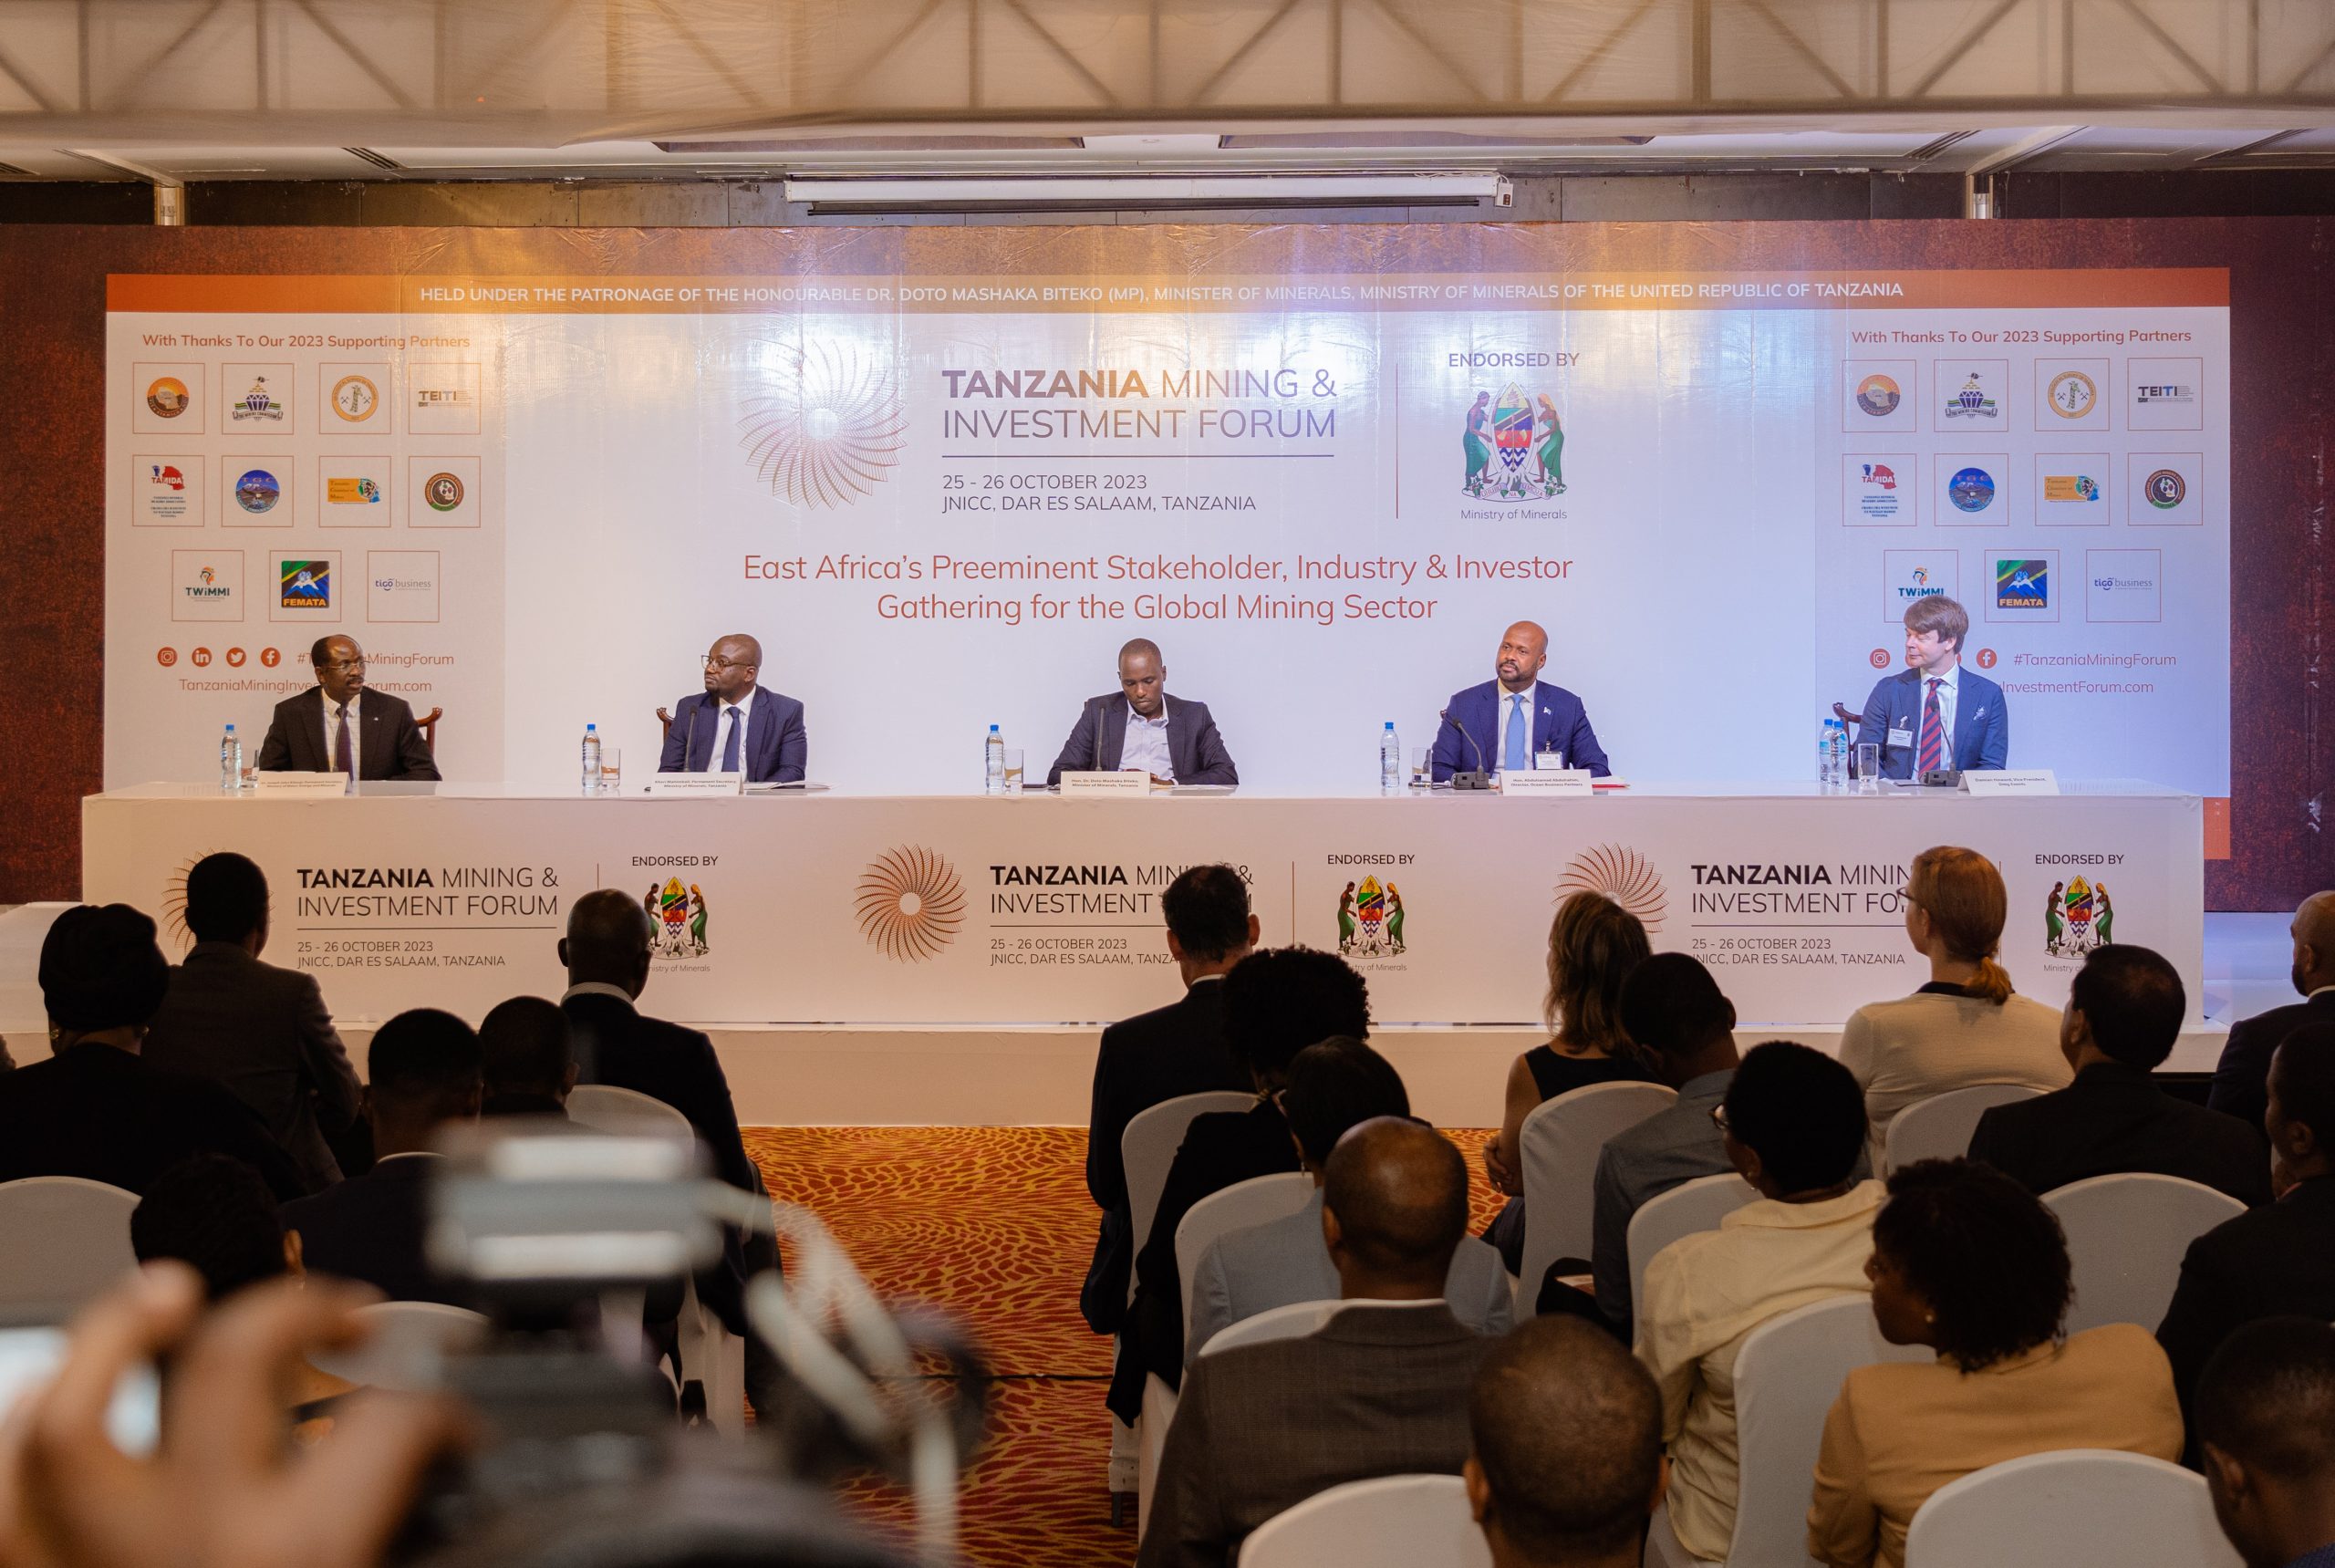 Tanzania Charms Investors Ahead of Mining and Investment Forum 2023